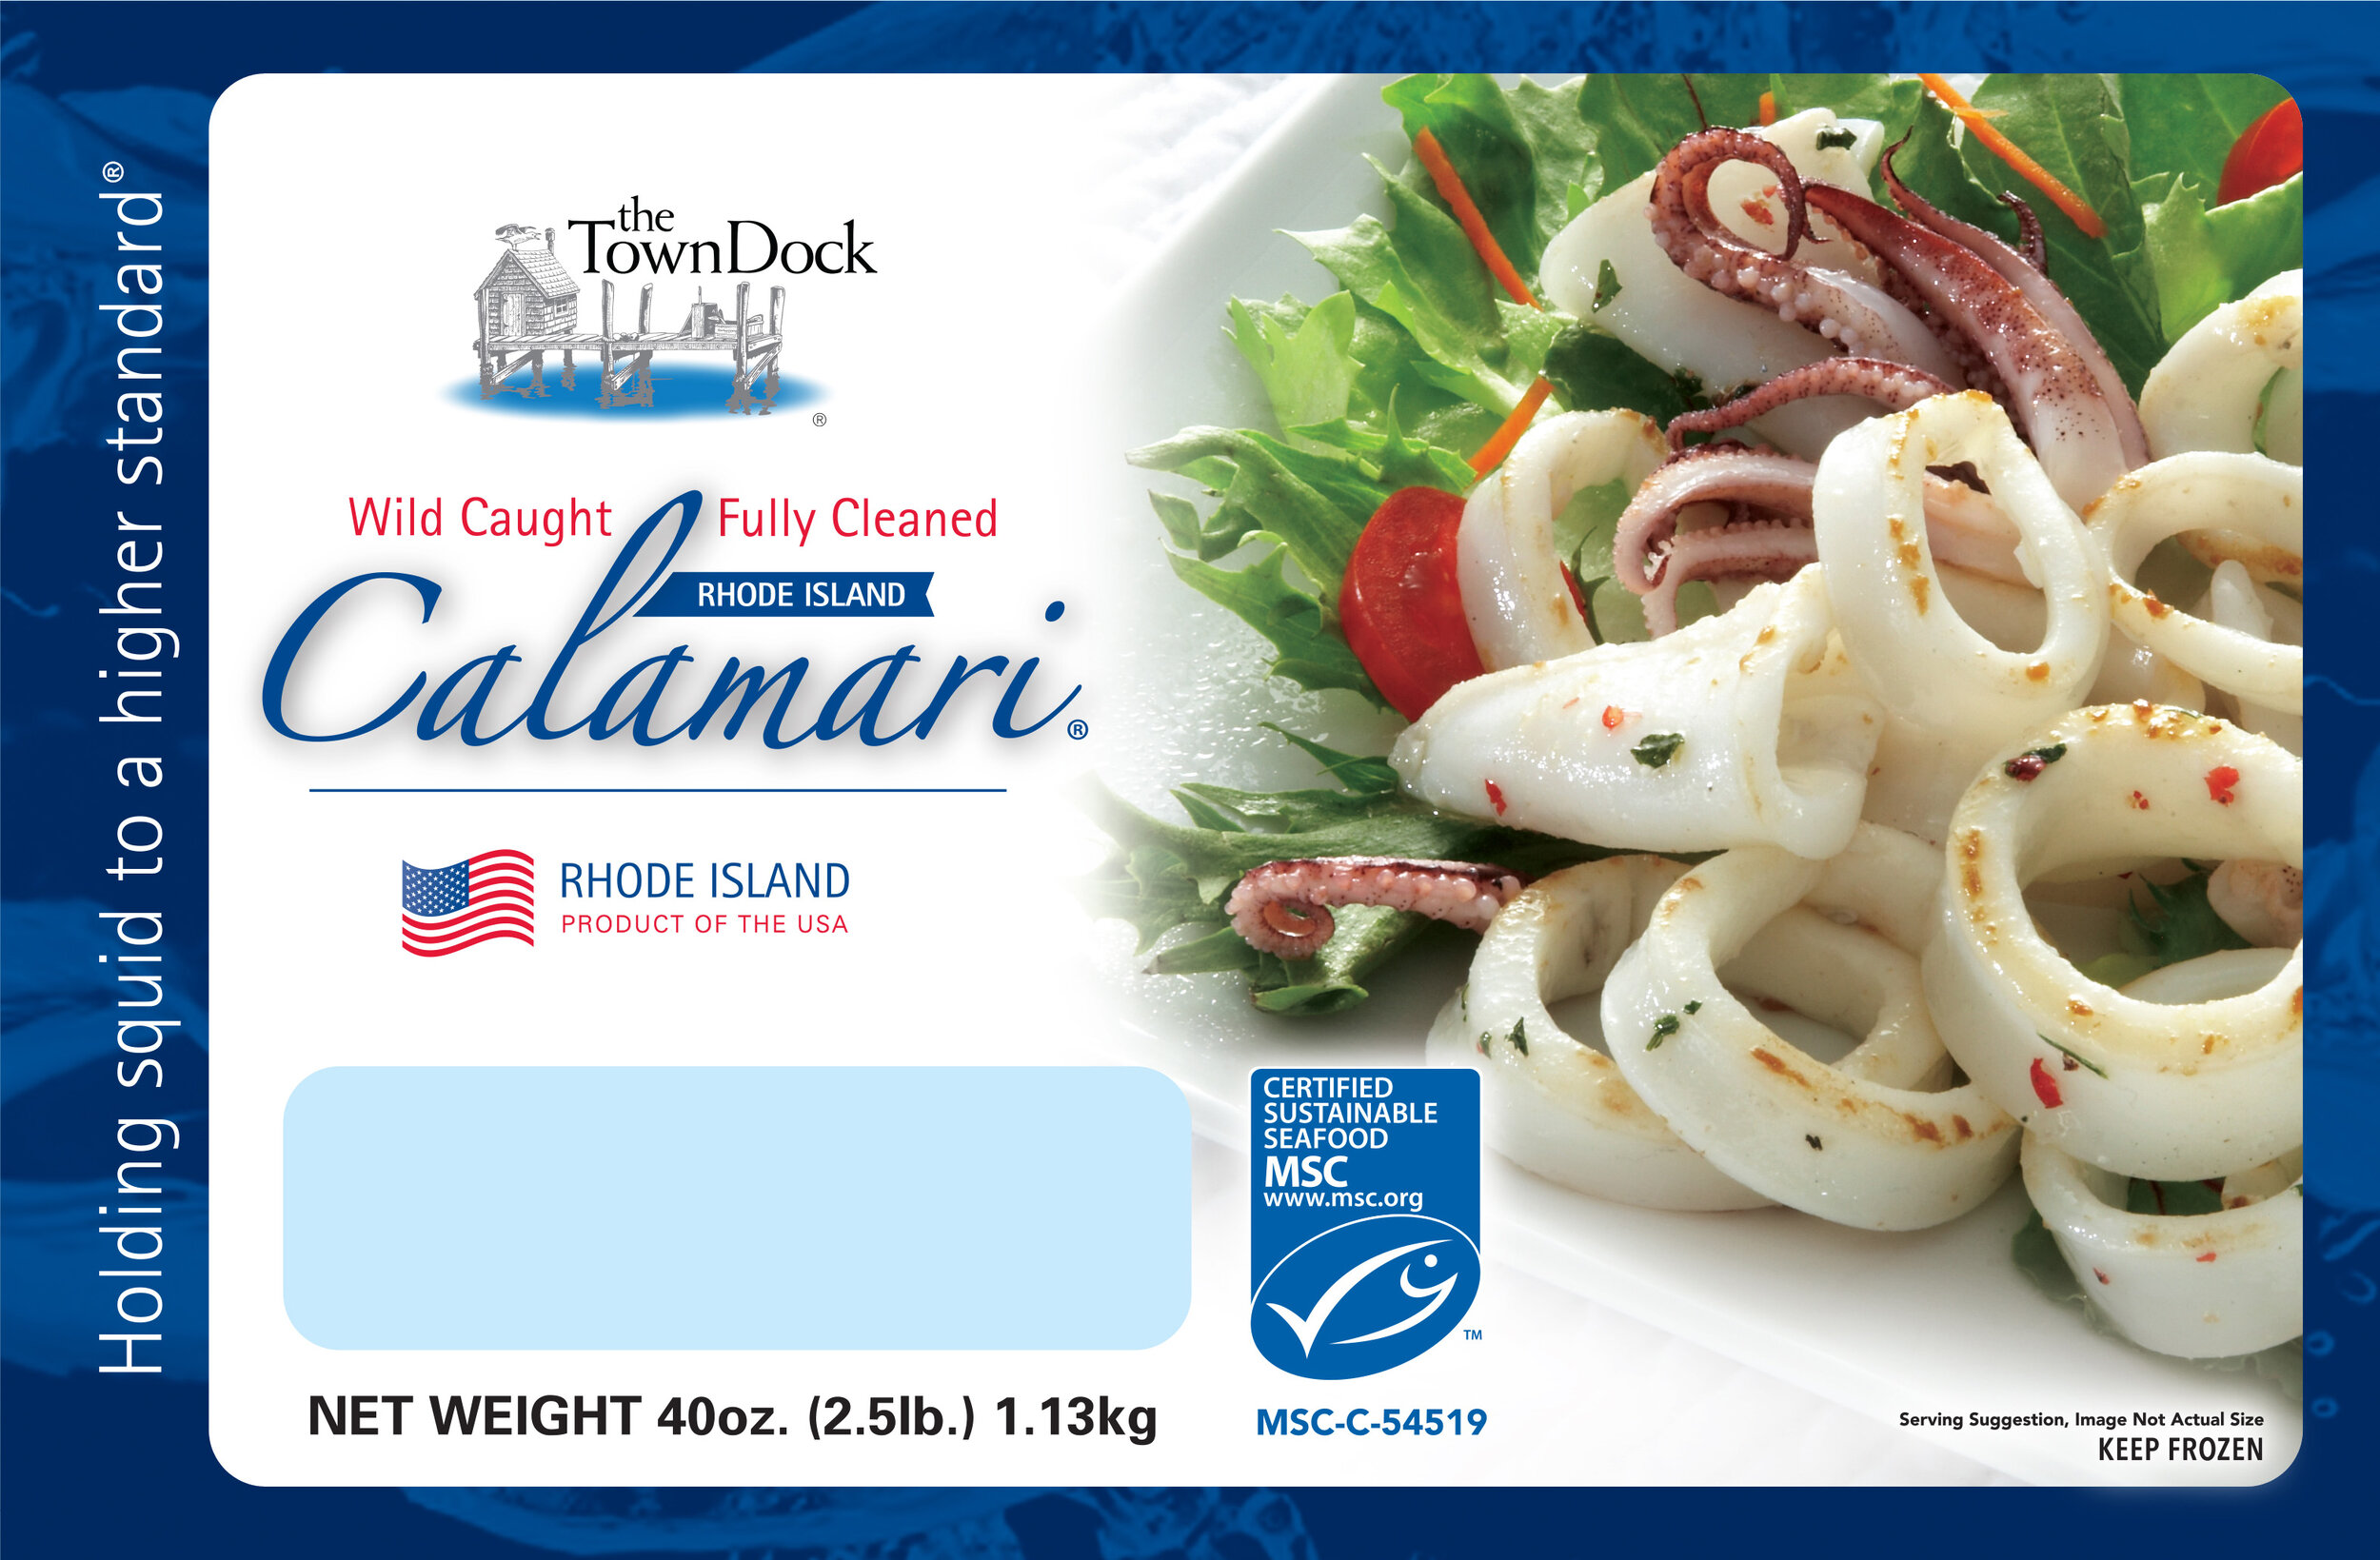 Picture of Rhode Island Calamari bag, certified sustainable squid, product of USA calamari, which has a medium blue border